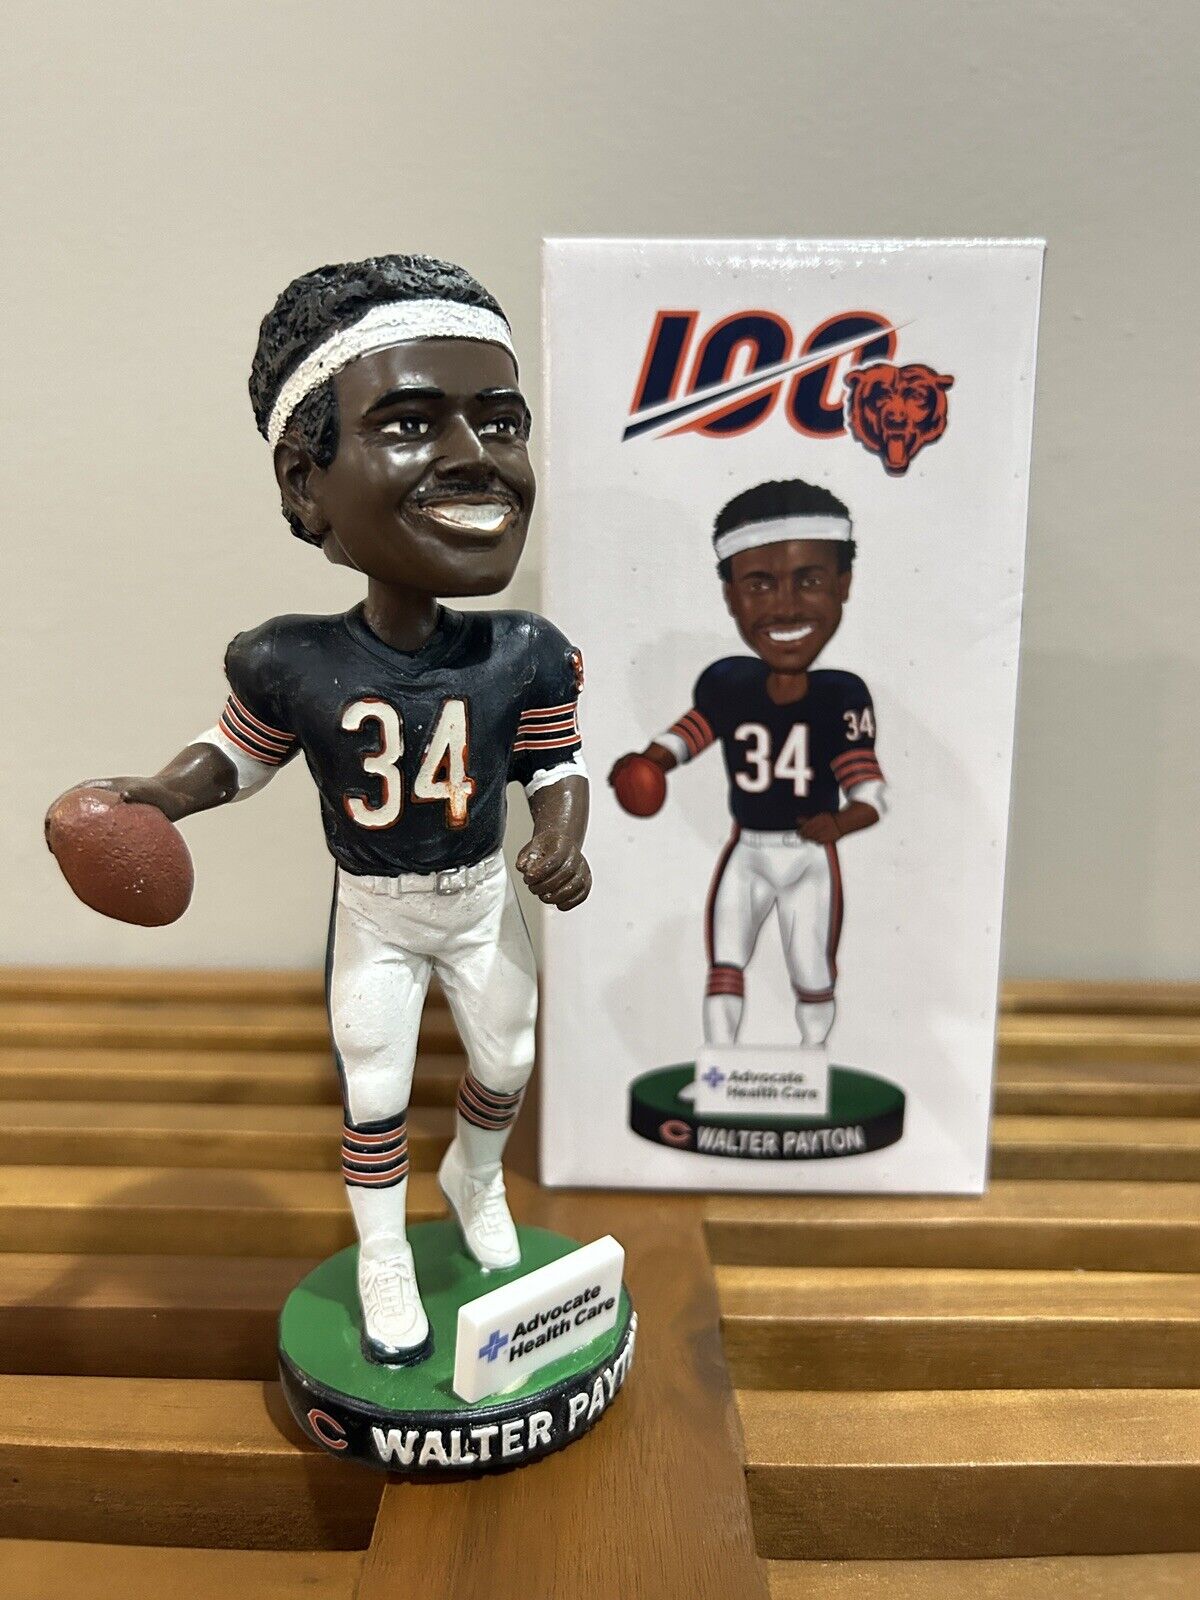 Walter Payton Advocate Health Care Chicago bears HOF Bobblehead Giveaway READ